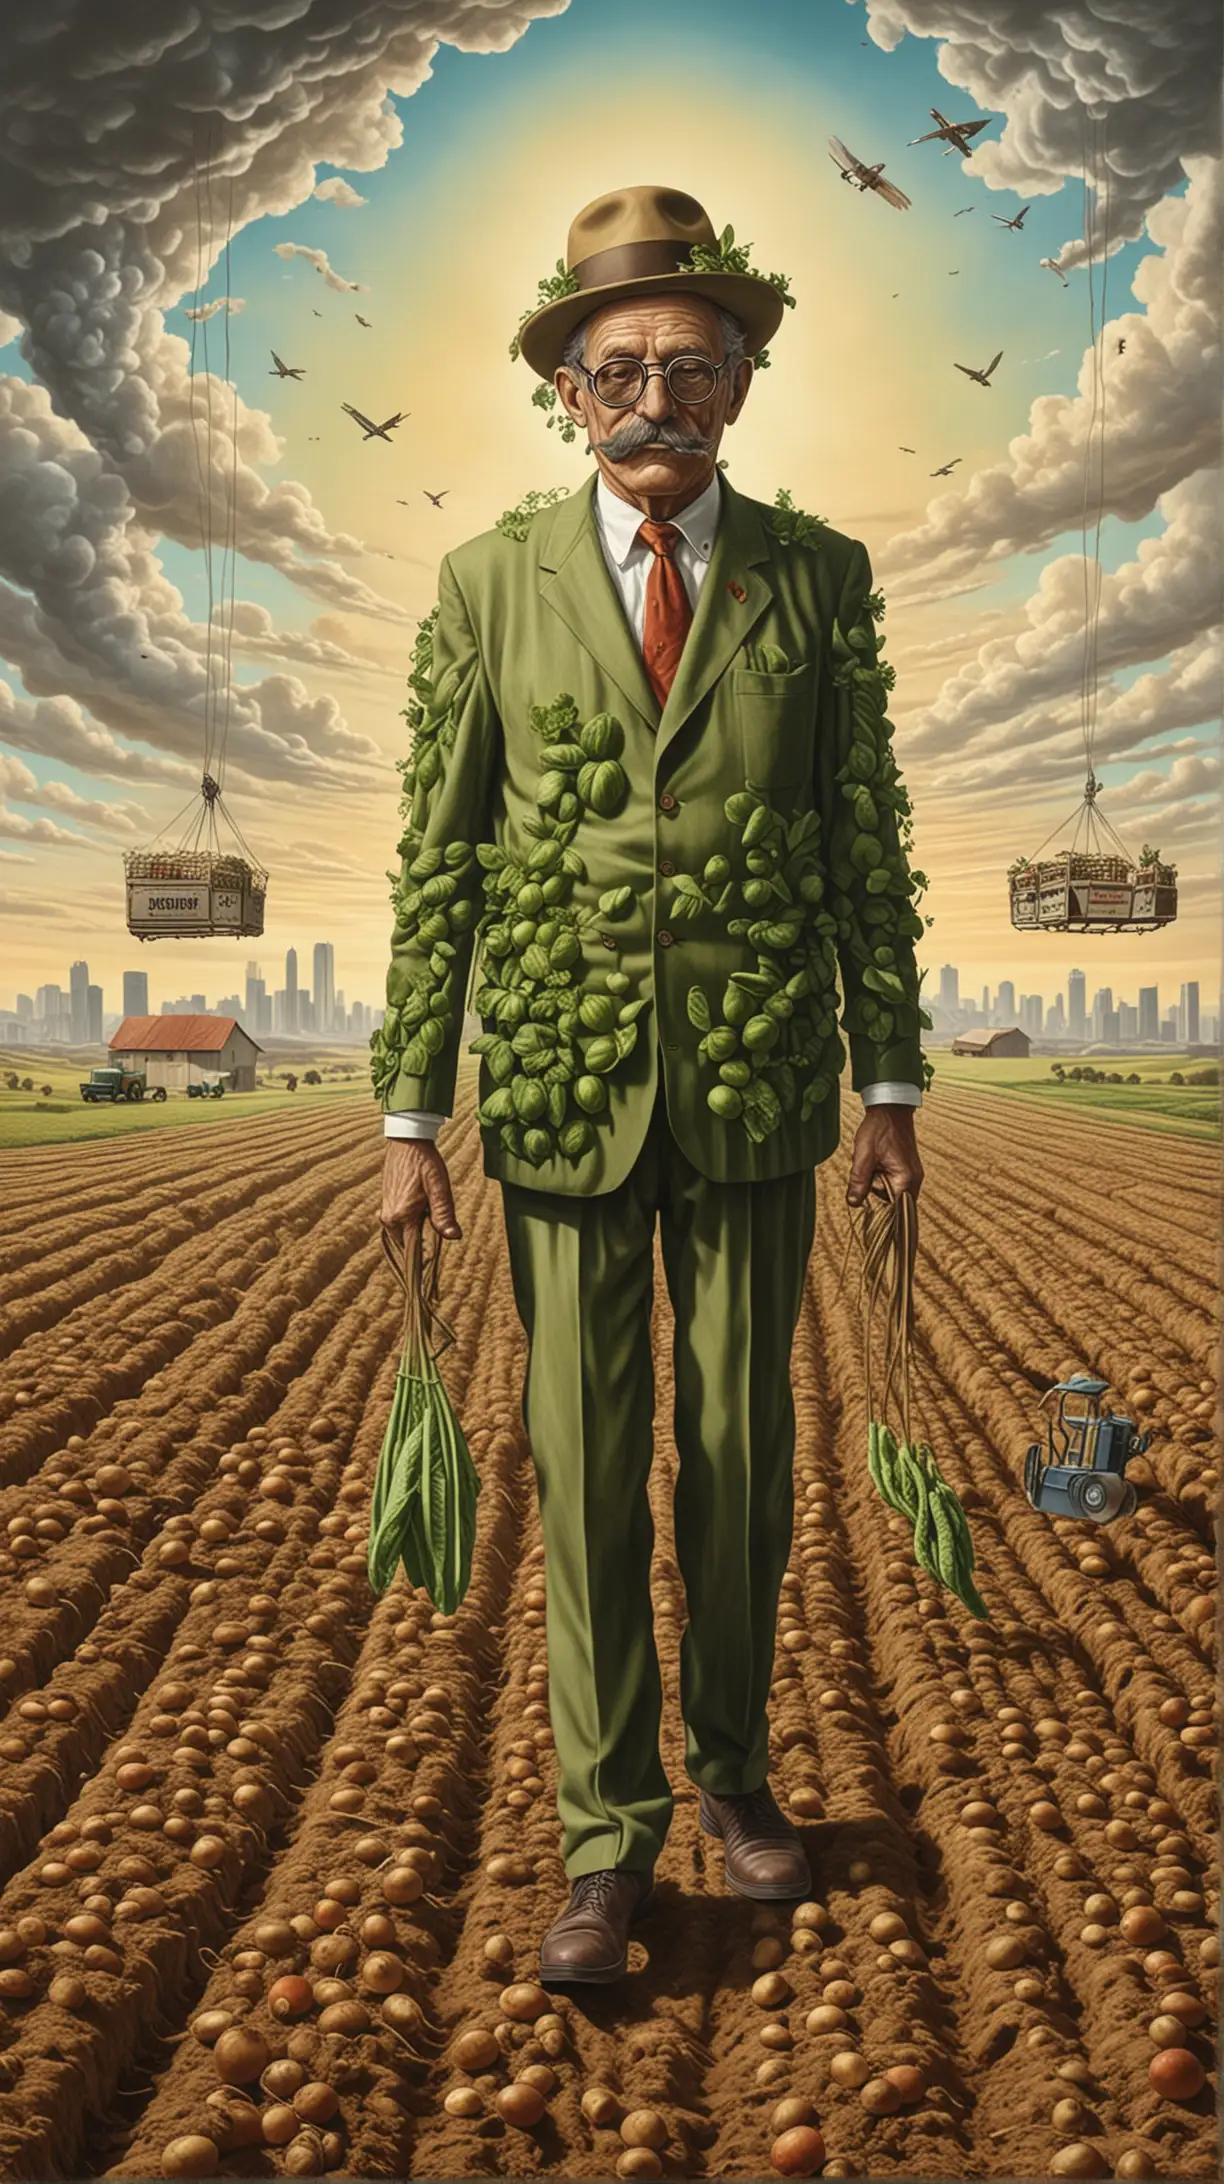 surrealist artwork showing capitalist system is incompatible with sustainable agriculture